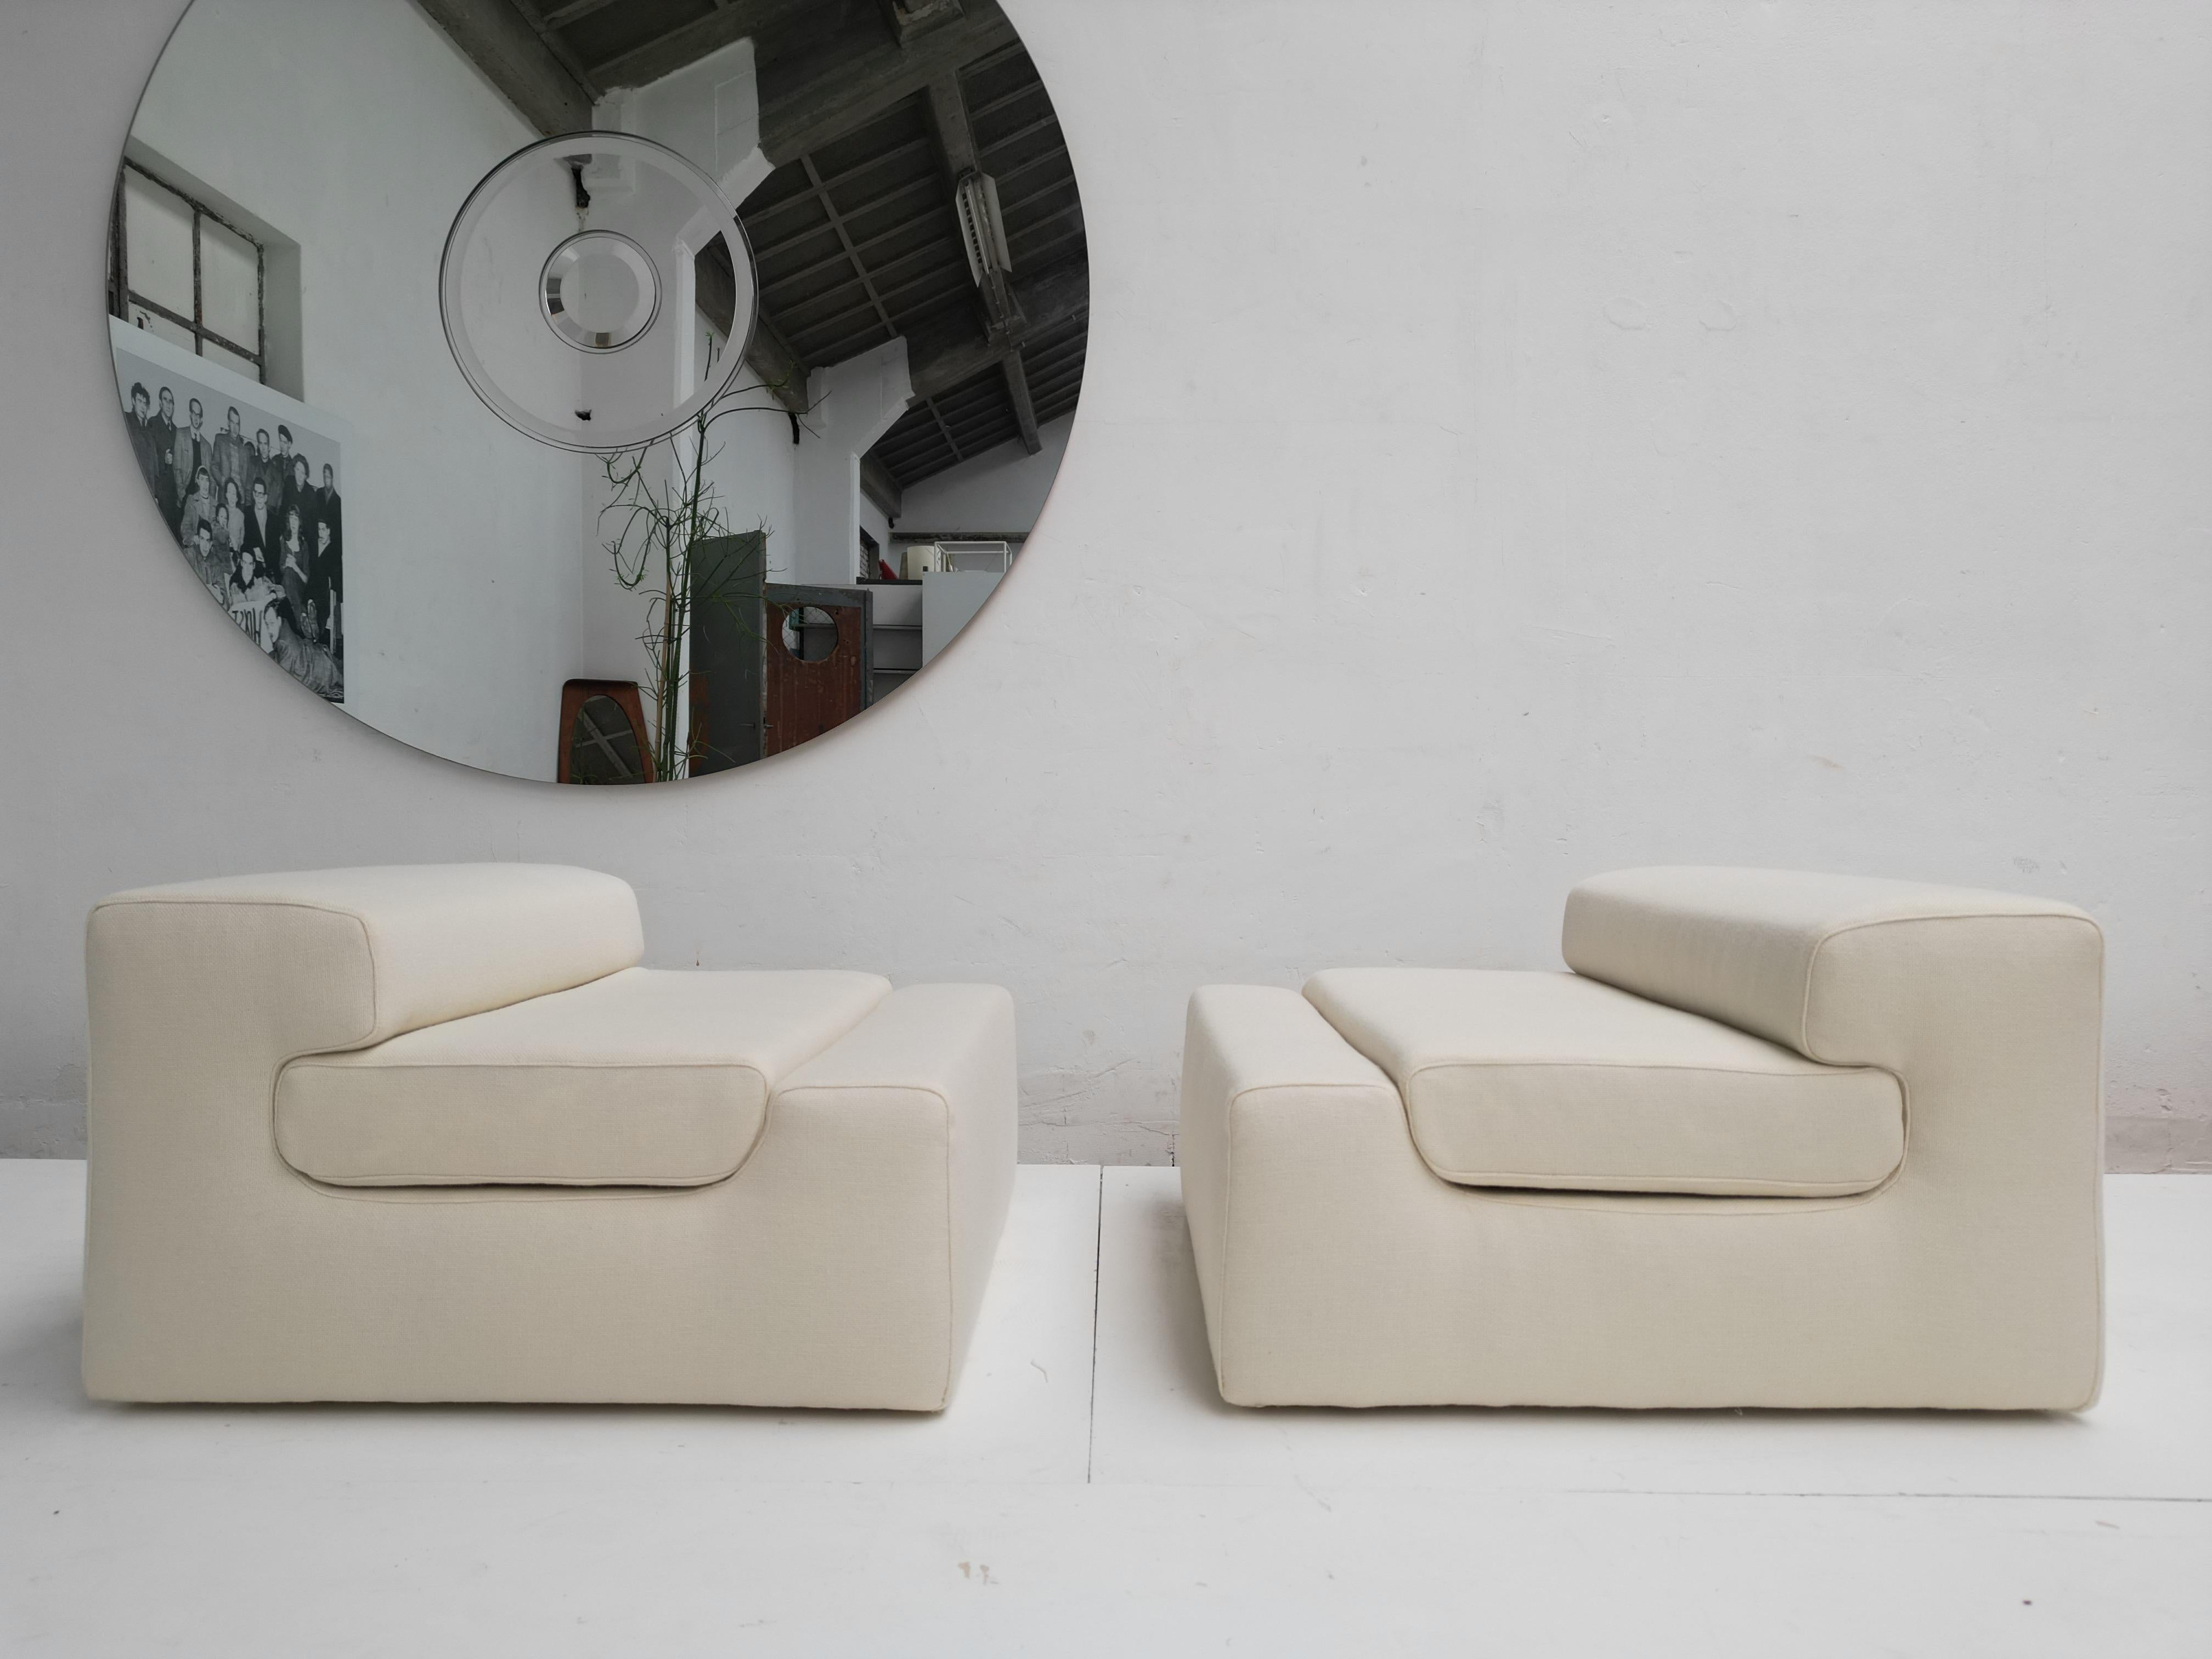 Beautiful and extremely rare pair of sculptural form modular lounge chairs designed by architect, designer and sculptor Angelo Mangiarotti in 1969 for the 'Casa Vitale' in Milan, Italy. The seating that Mangiarotti designed for the 'Casa Vitale' was